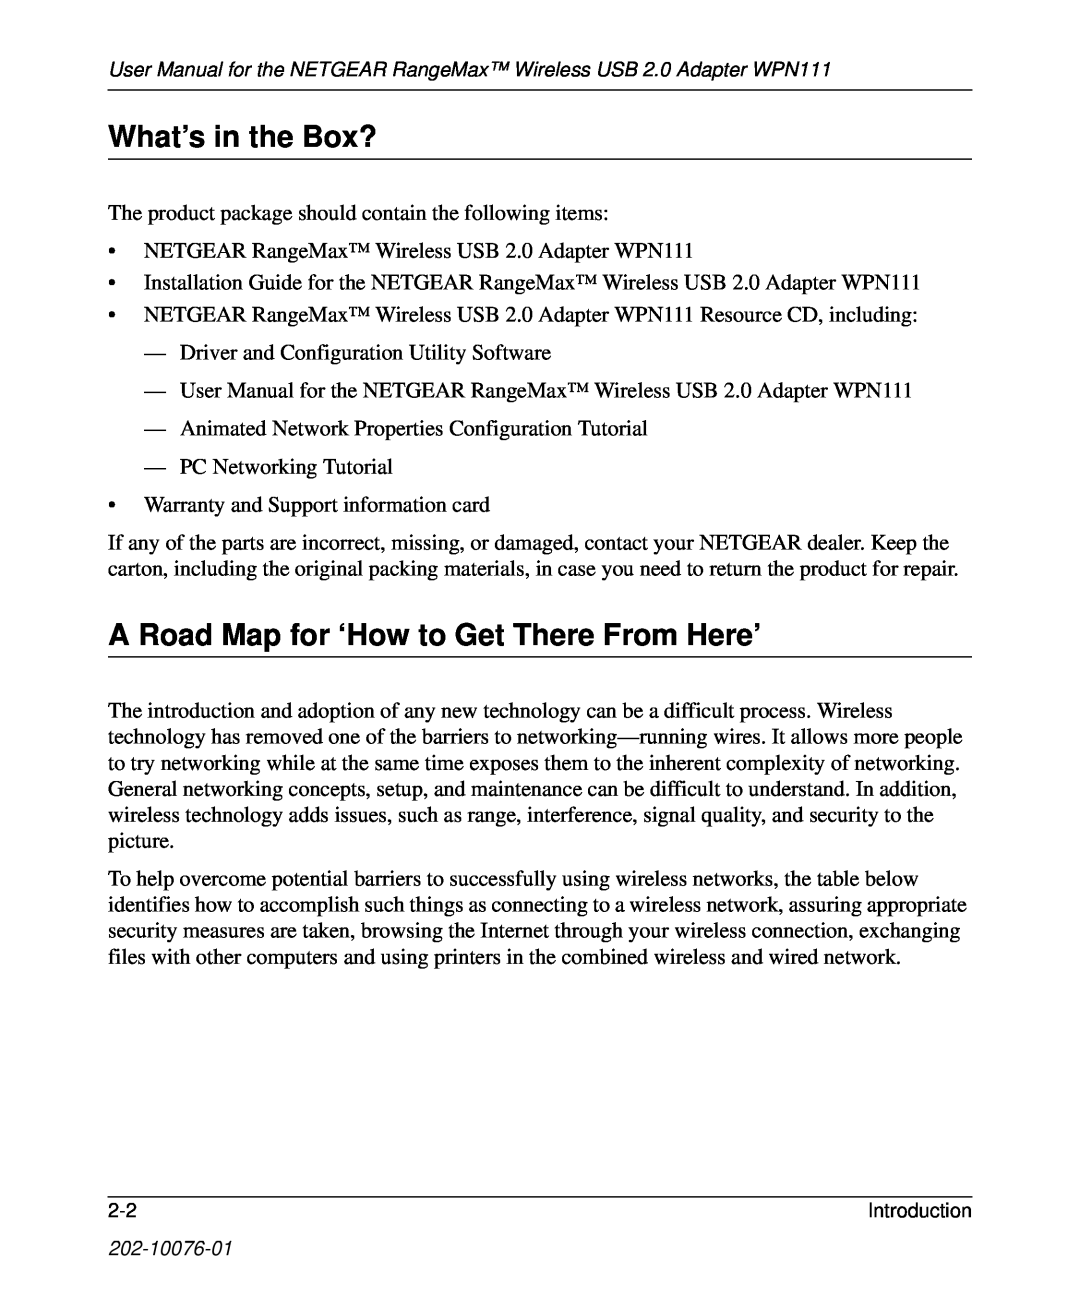 NETGEAR WPN111 user manual What’s in the Box?, A Road Map for ‘How to Get There From Here’ 